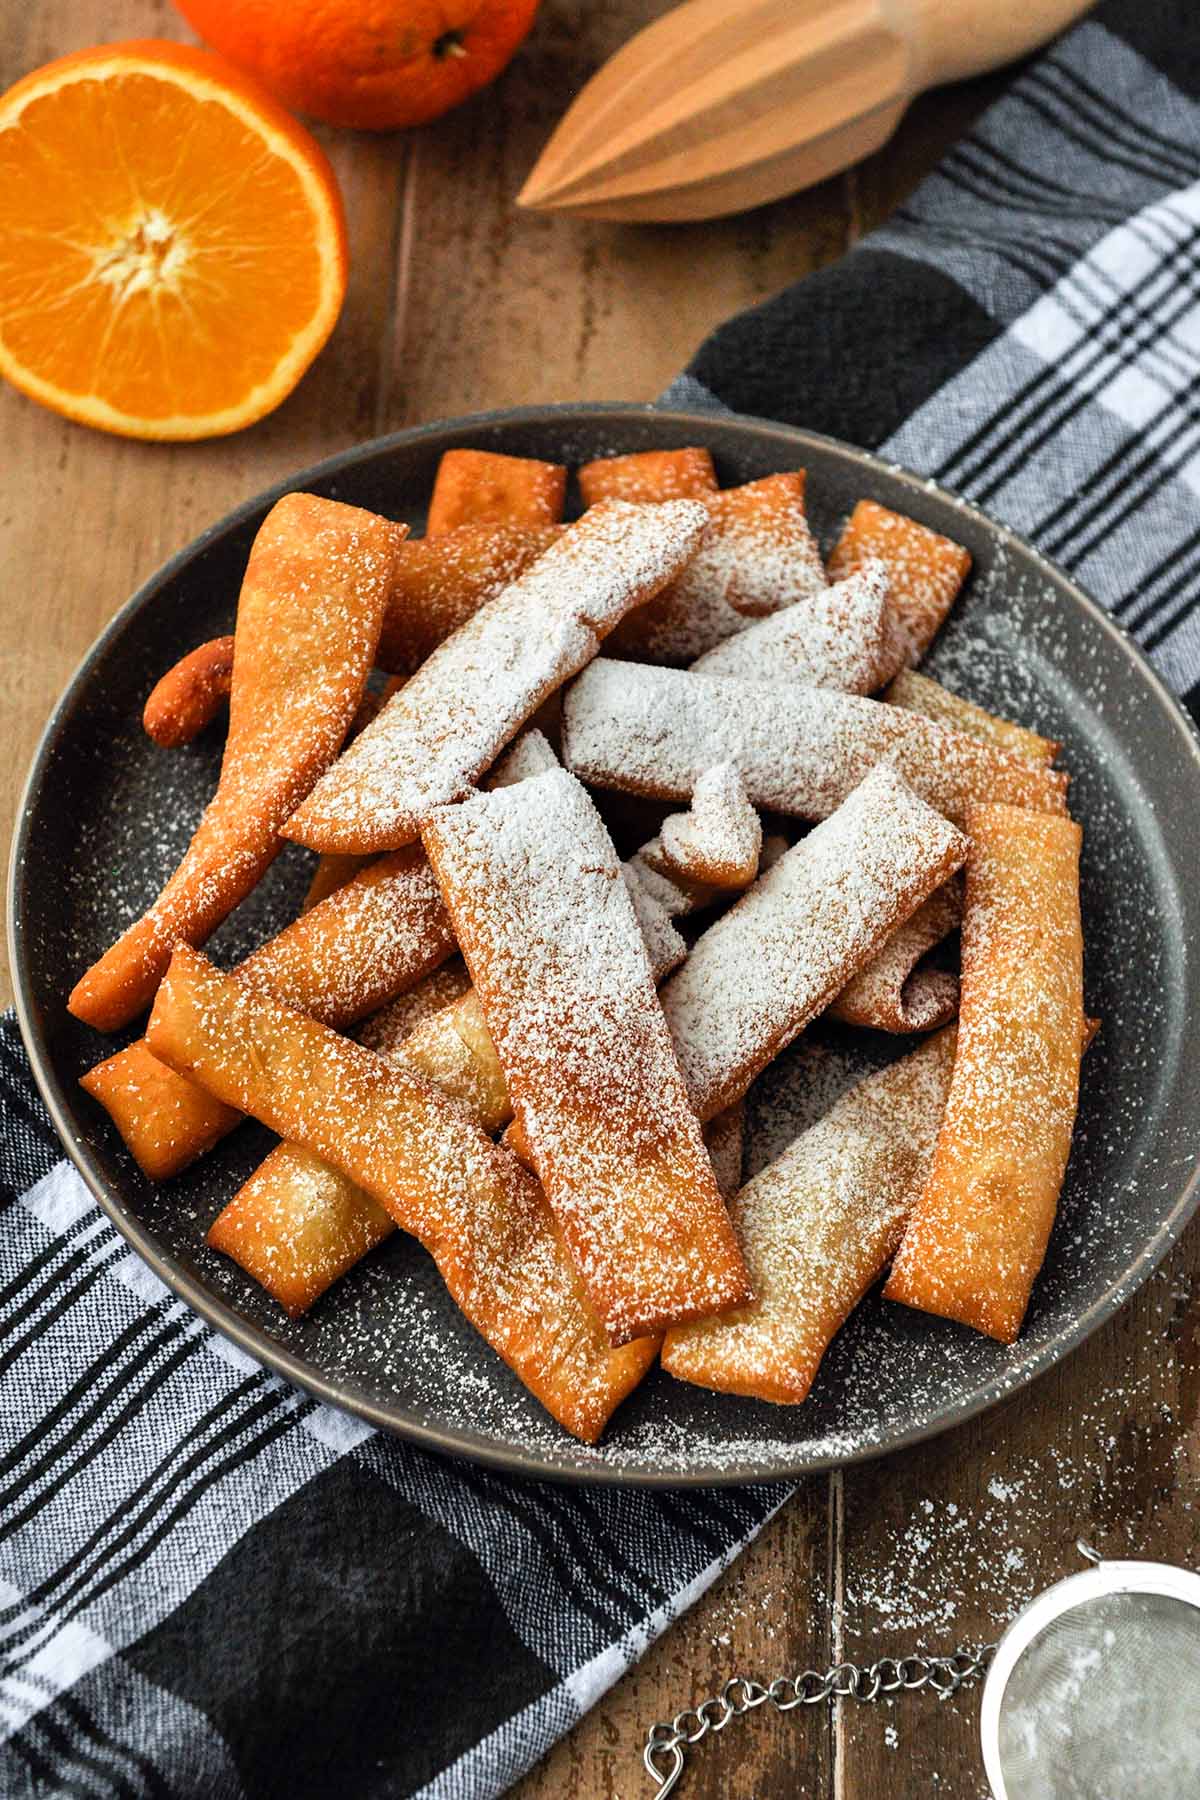 On a black and white towel sits a plate of hojuelas that has been dusted with powdered sugar. Half an orange and a citrus reamer are in the background.